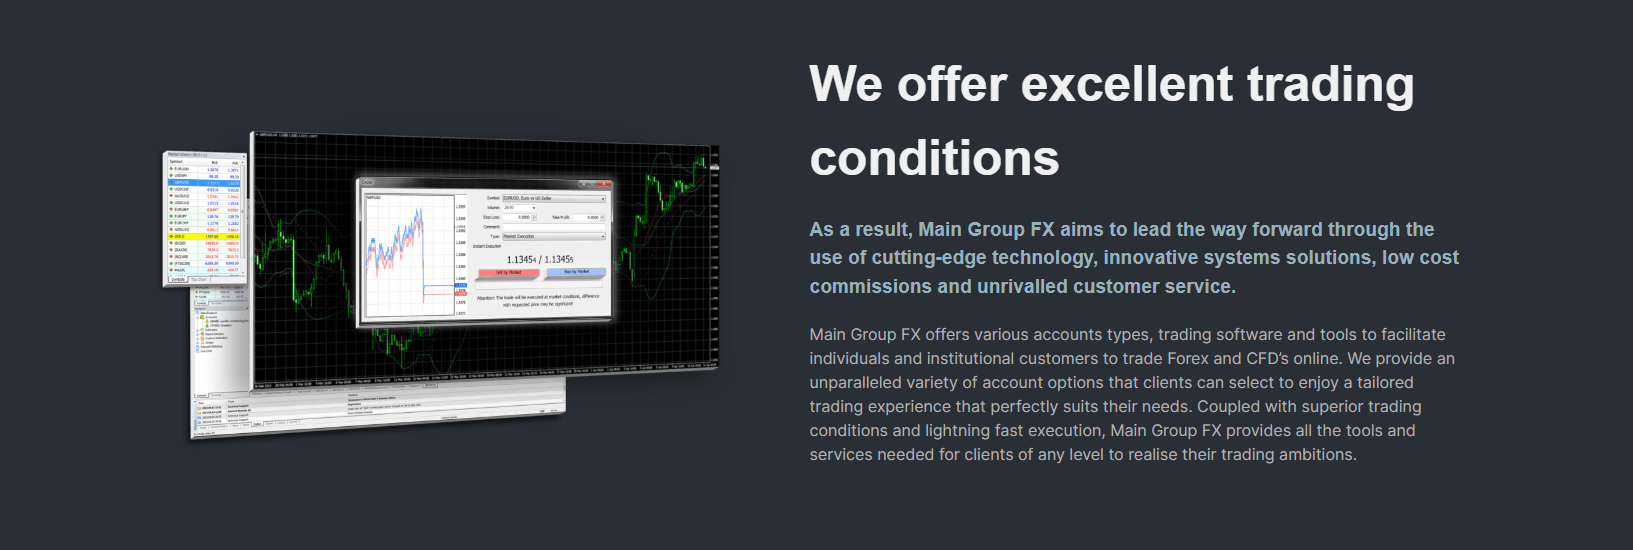 Main Group FX trading conditions